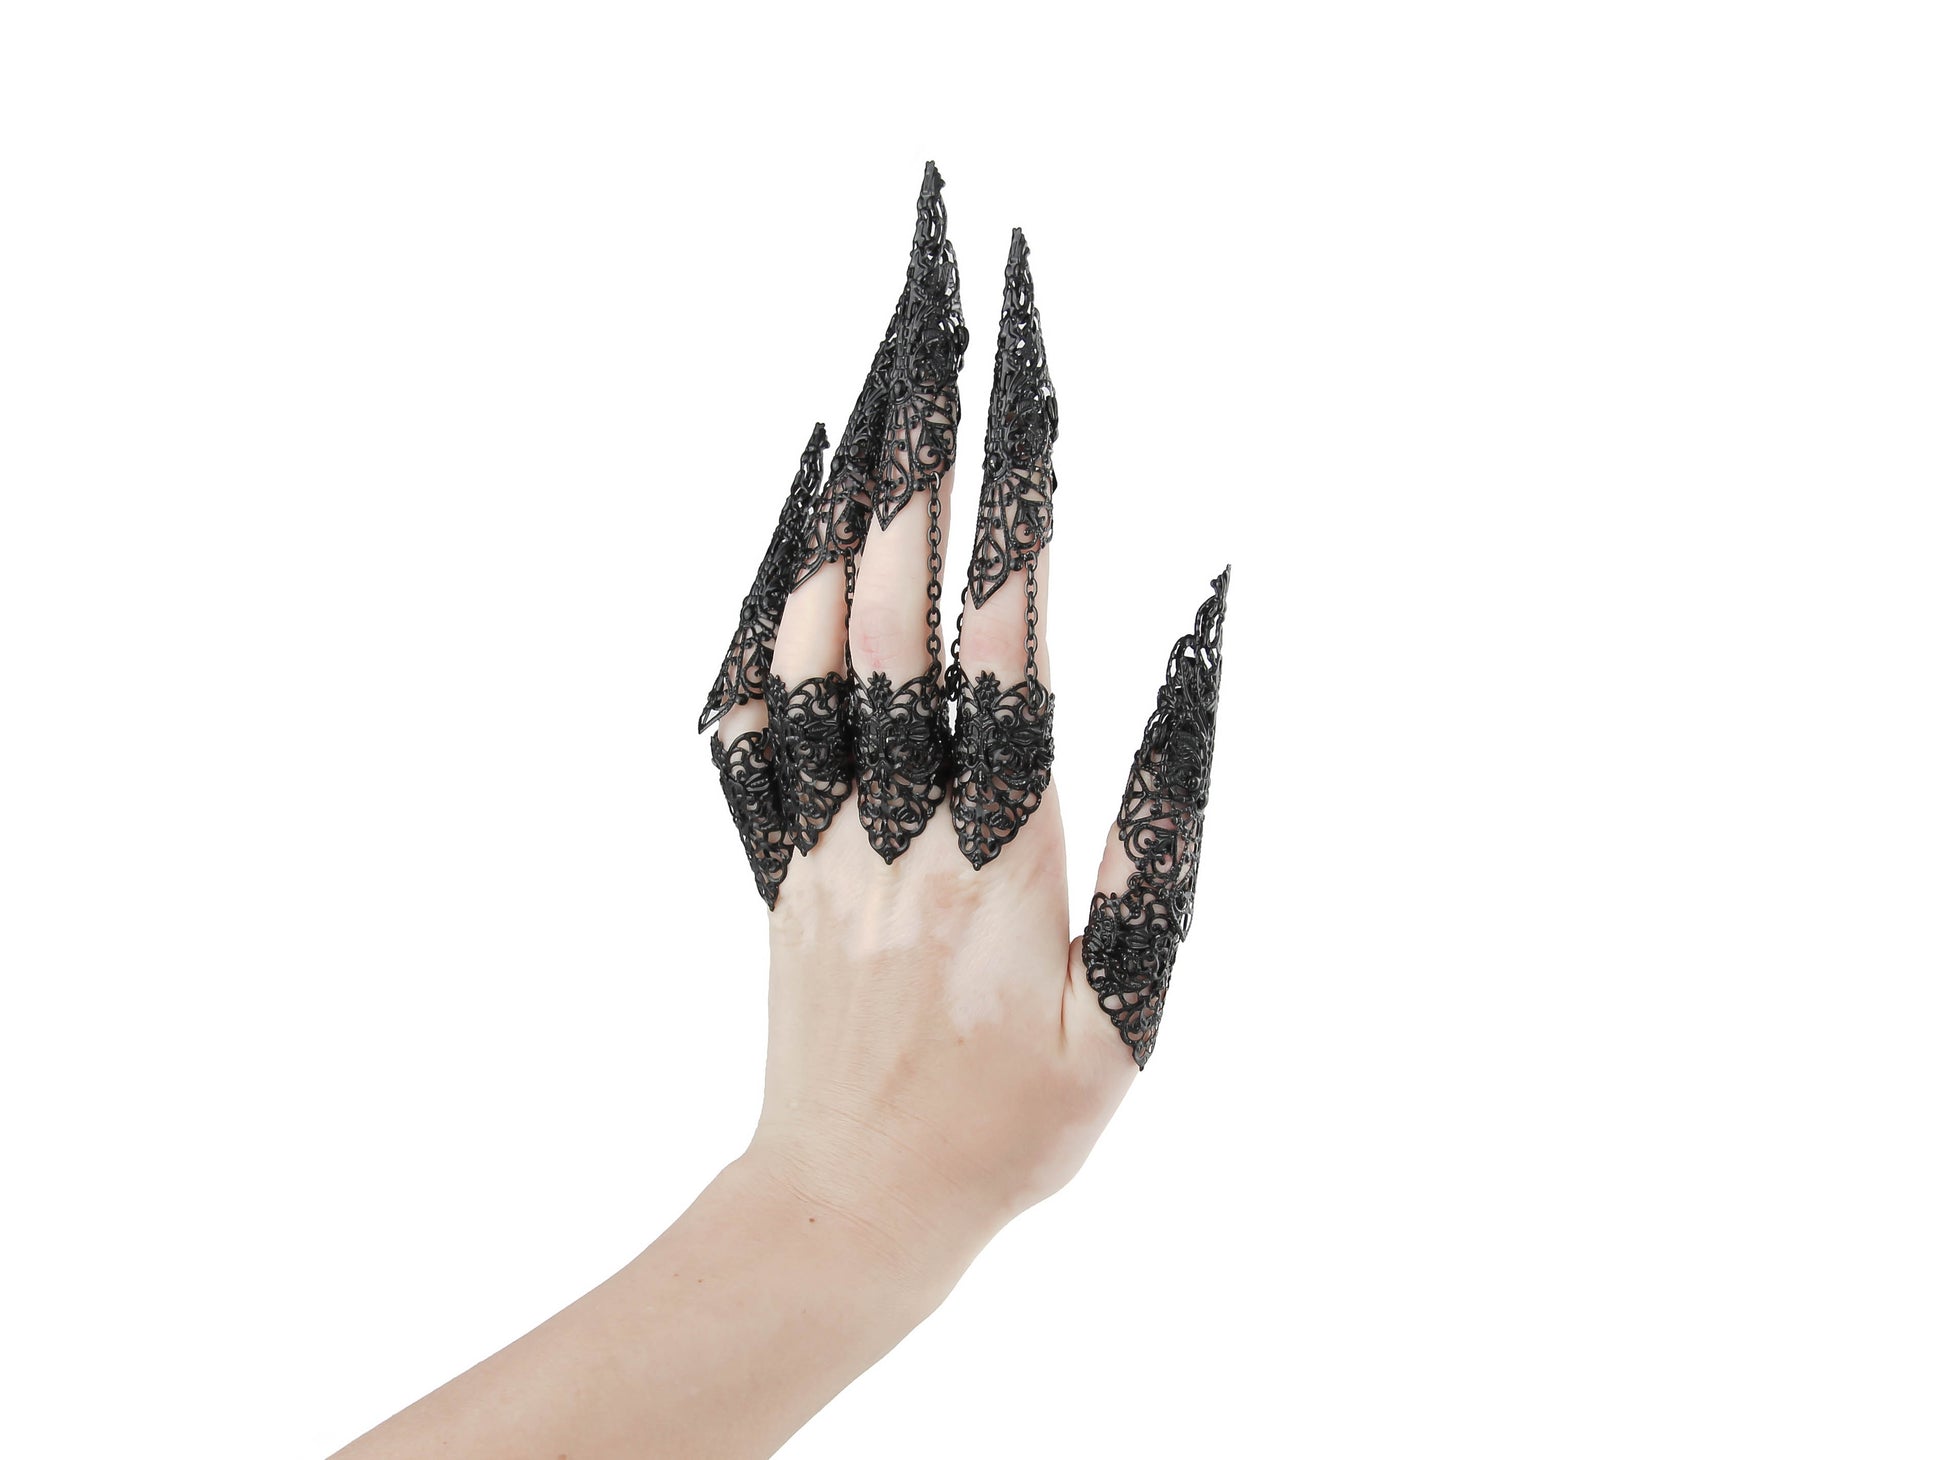 A hand adorned with Myril Jewels' full set of black armor rings, each extending into a filigree long claw, encapsulates the essence of neo-gothic elegance. These claw rings are perfect for dark-avantgarde enthusiasts, seamlessly blending with Halloween costumes or punk jewelry collections. They're also a statement piece for witchcore fashion, adding a dramatic touch to everyday wear or completing a rave party ensemble, and are striking enough for drag queen performances.